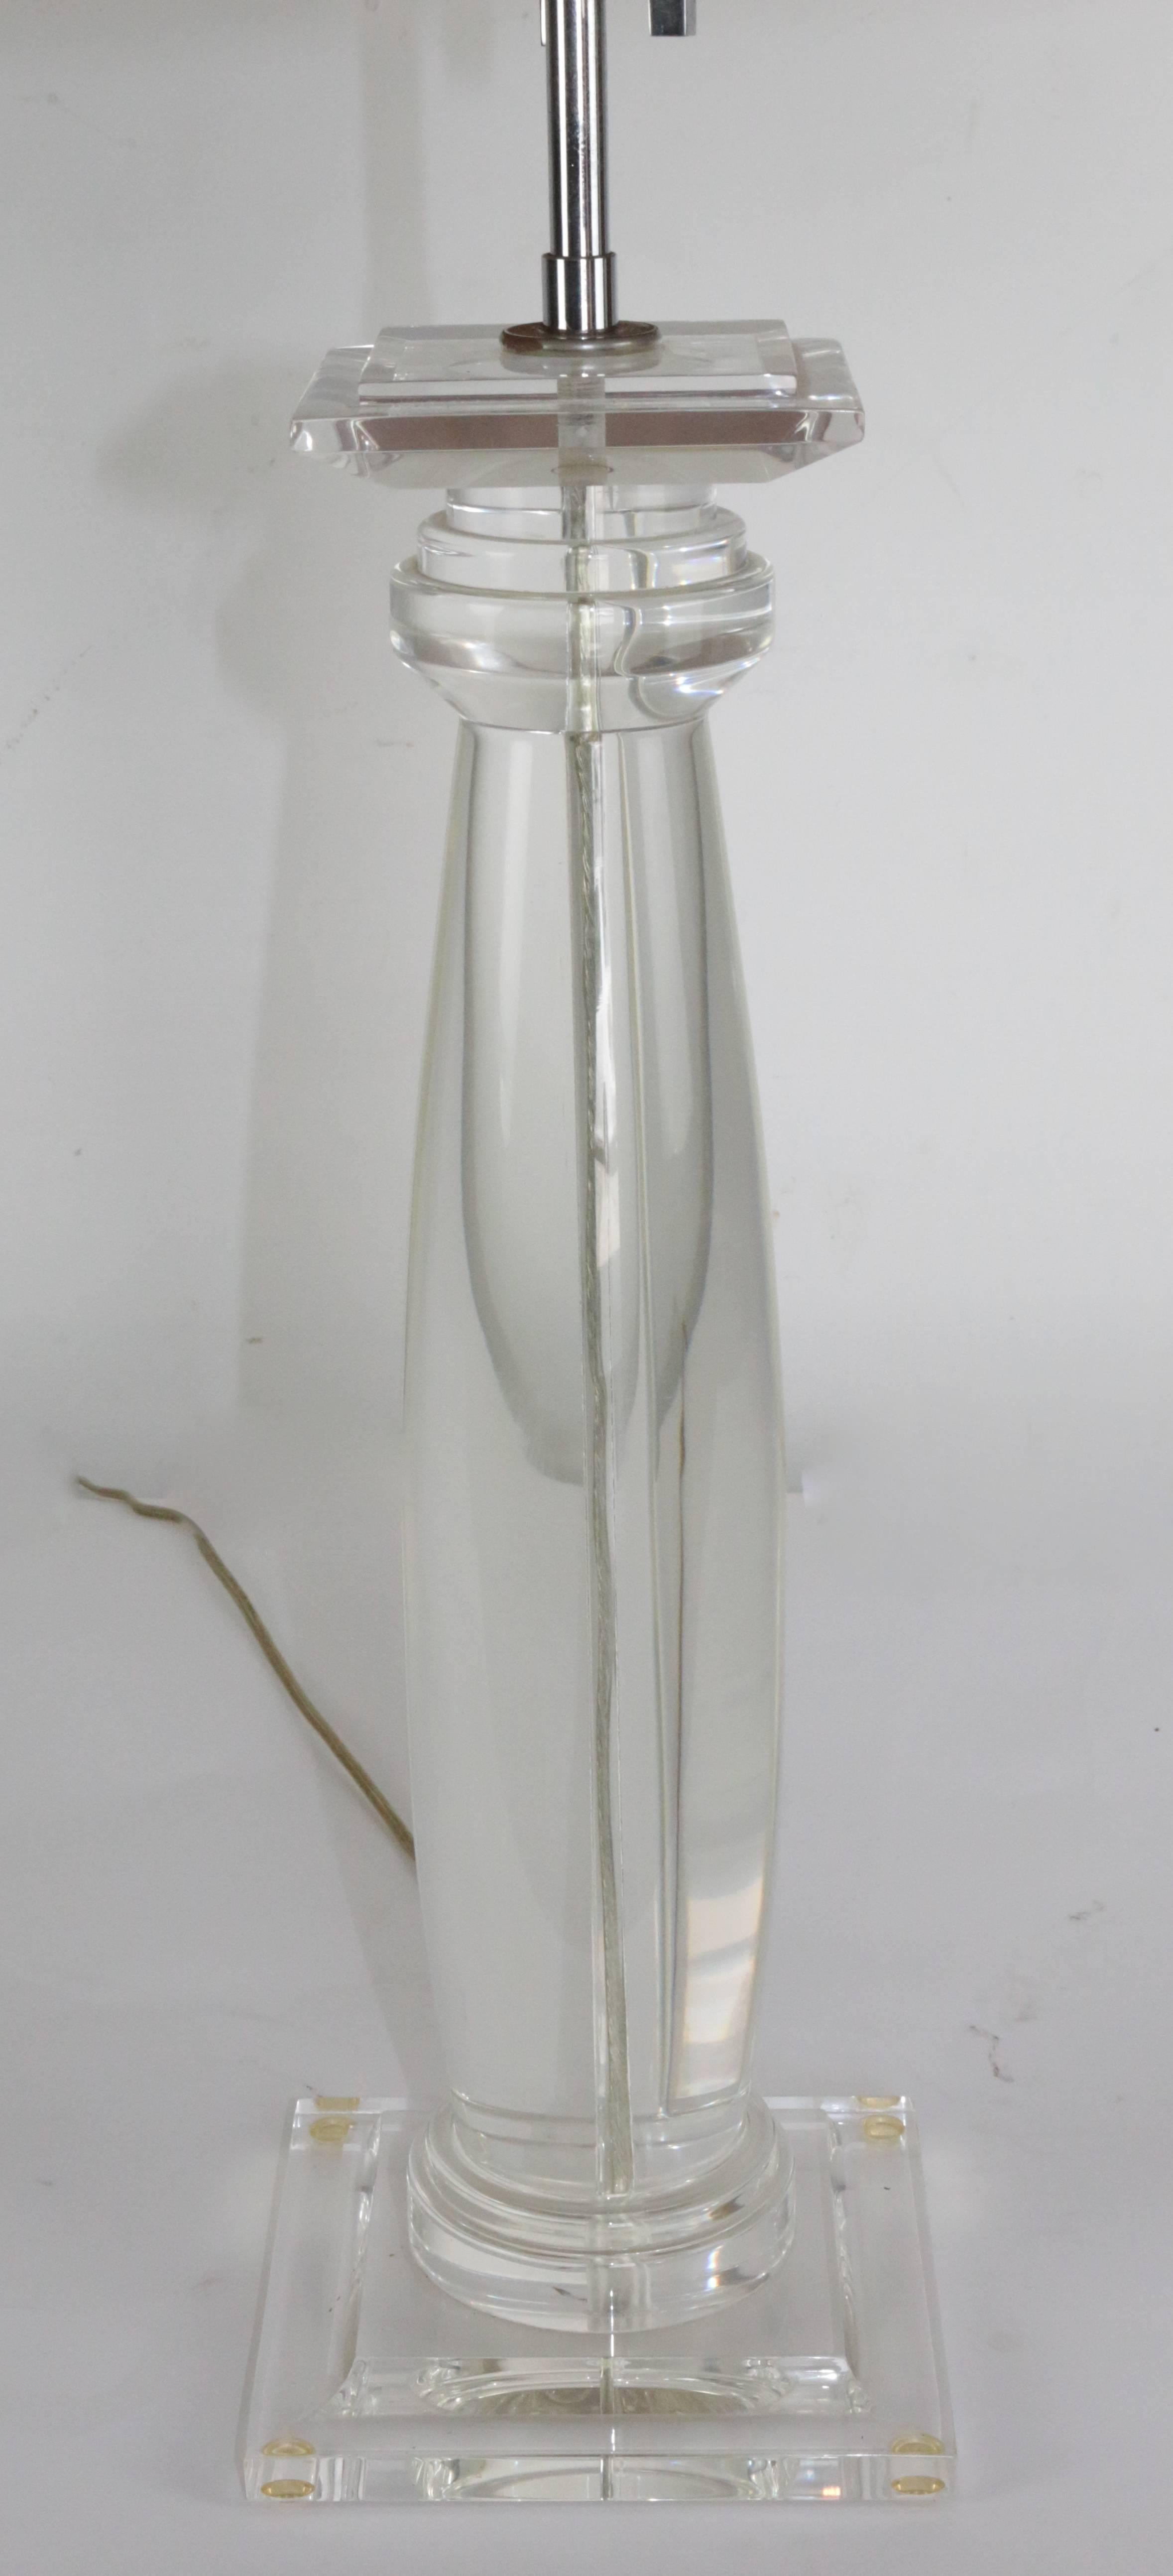 Shirly Ritts Lucite table lamp


Shade measurements:

Opening top 7 inches

Bottom of the shade is 22 inches.